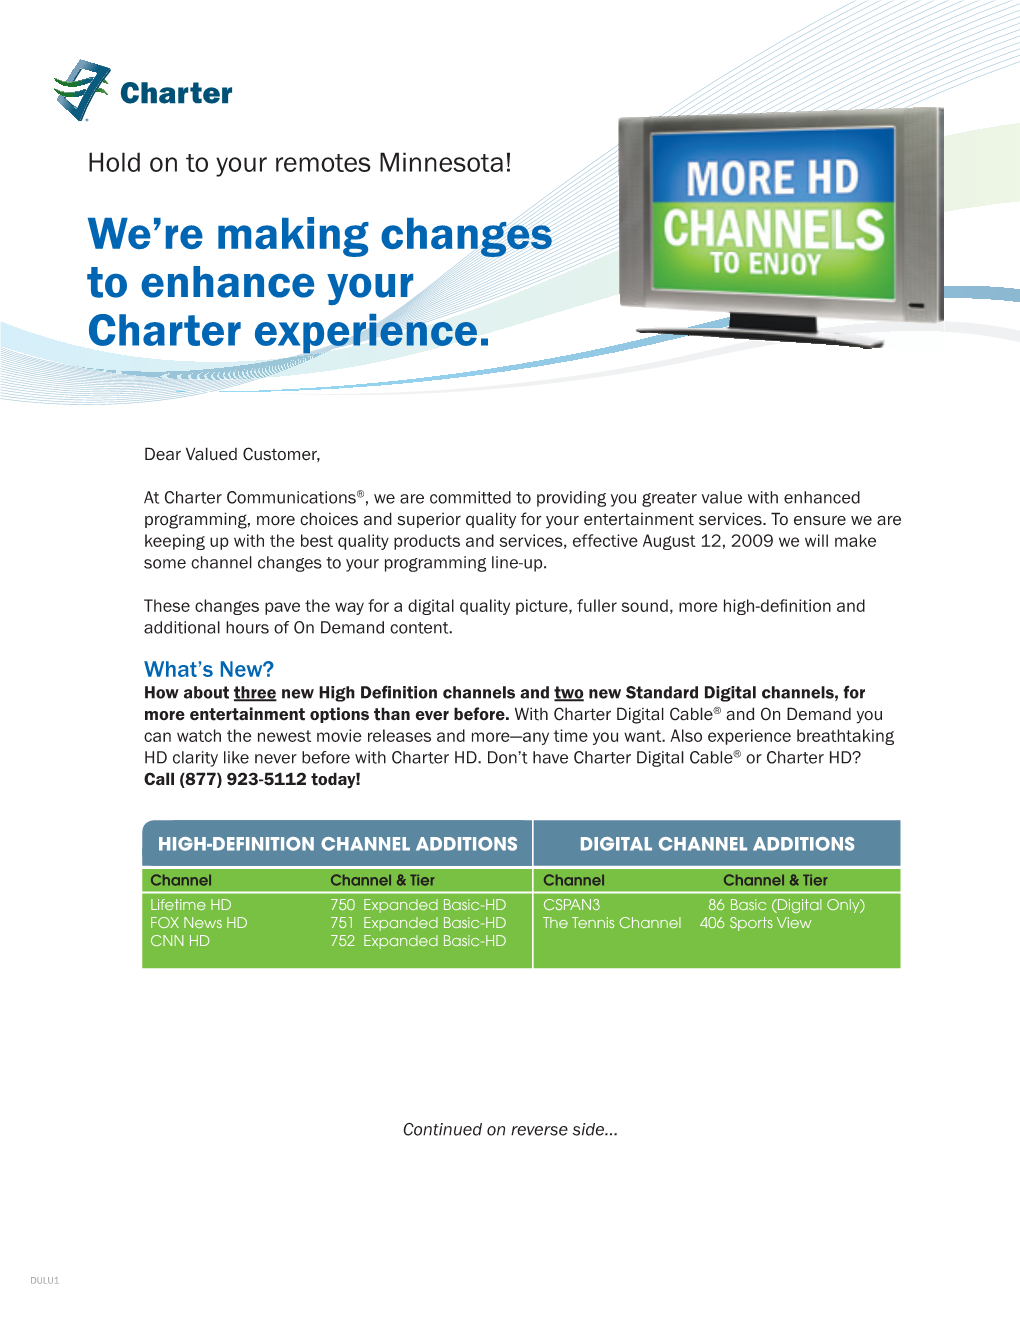 We're Making Changes to Enhance Your Charter Experience